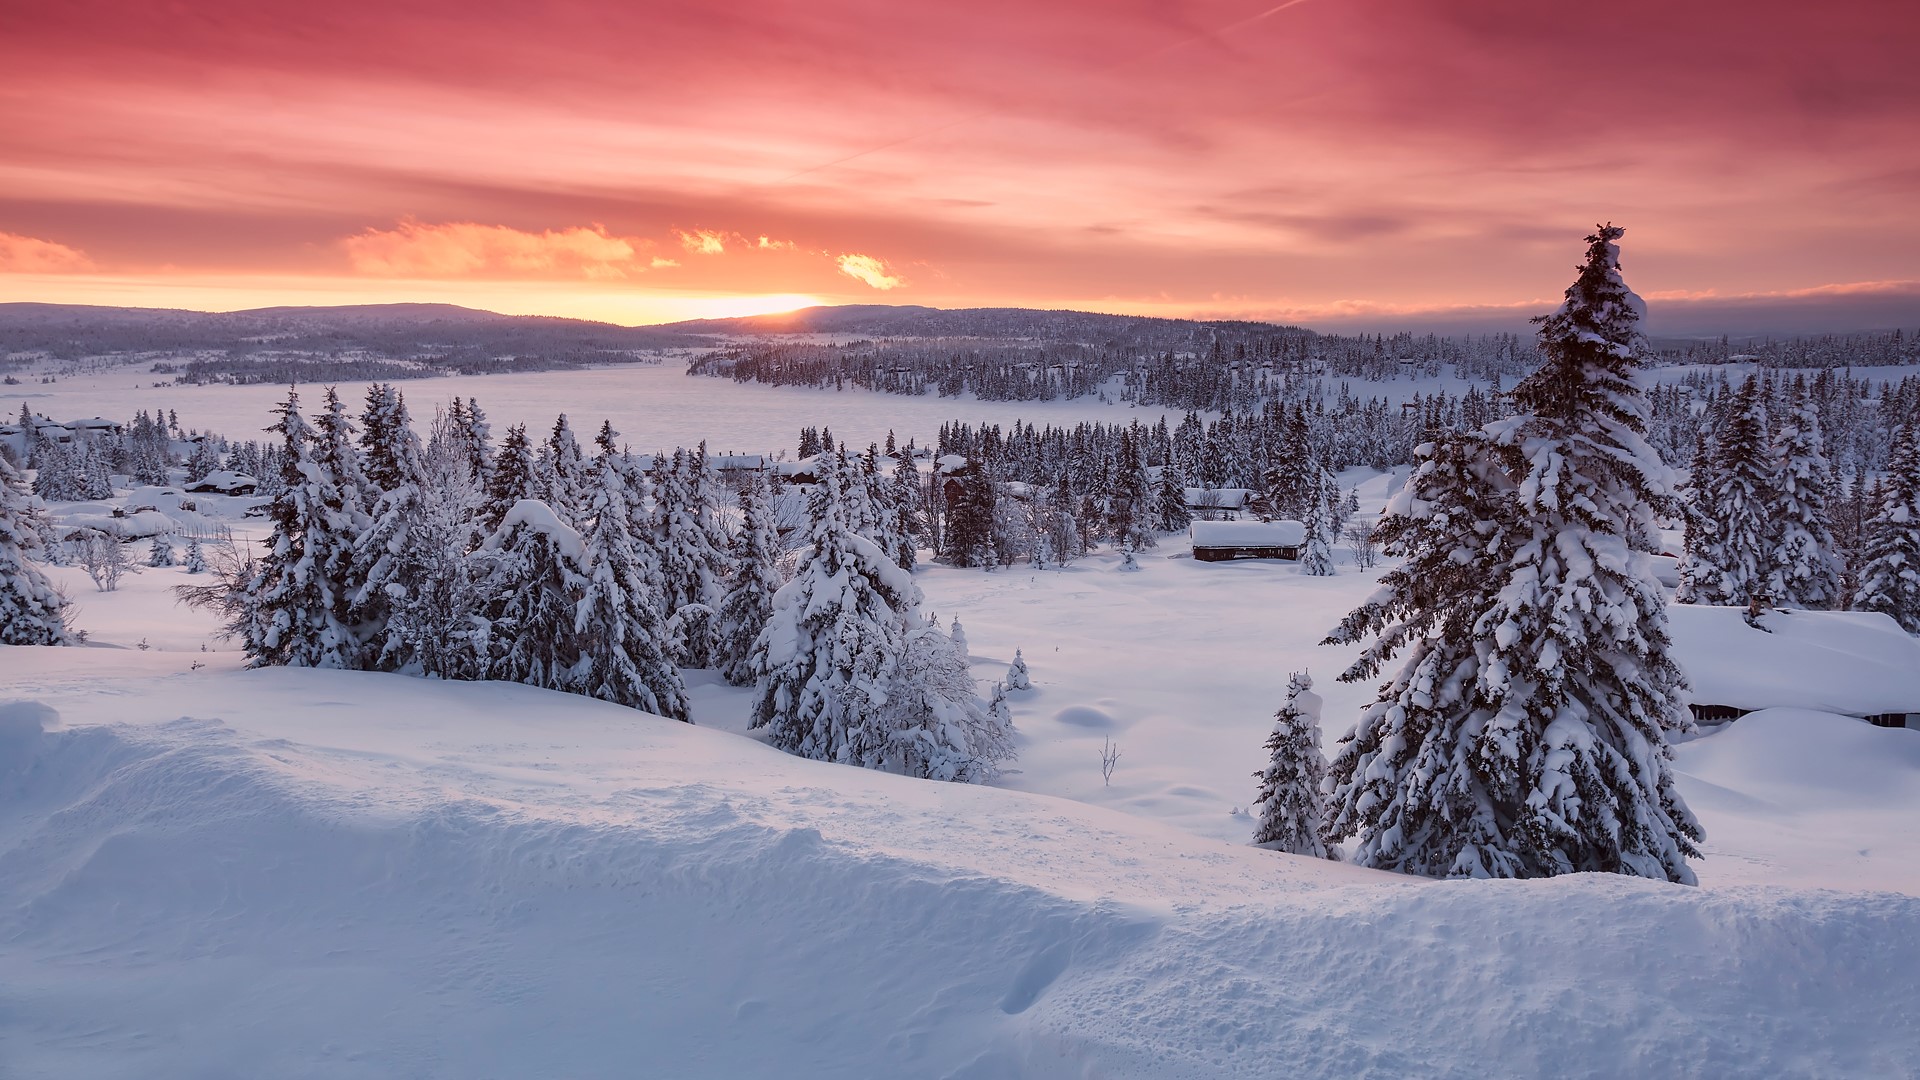 General 1920x1080 nature landscape snow sunset pink house mountains clouds hills Norway winter